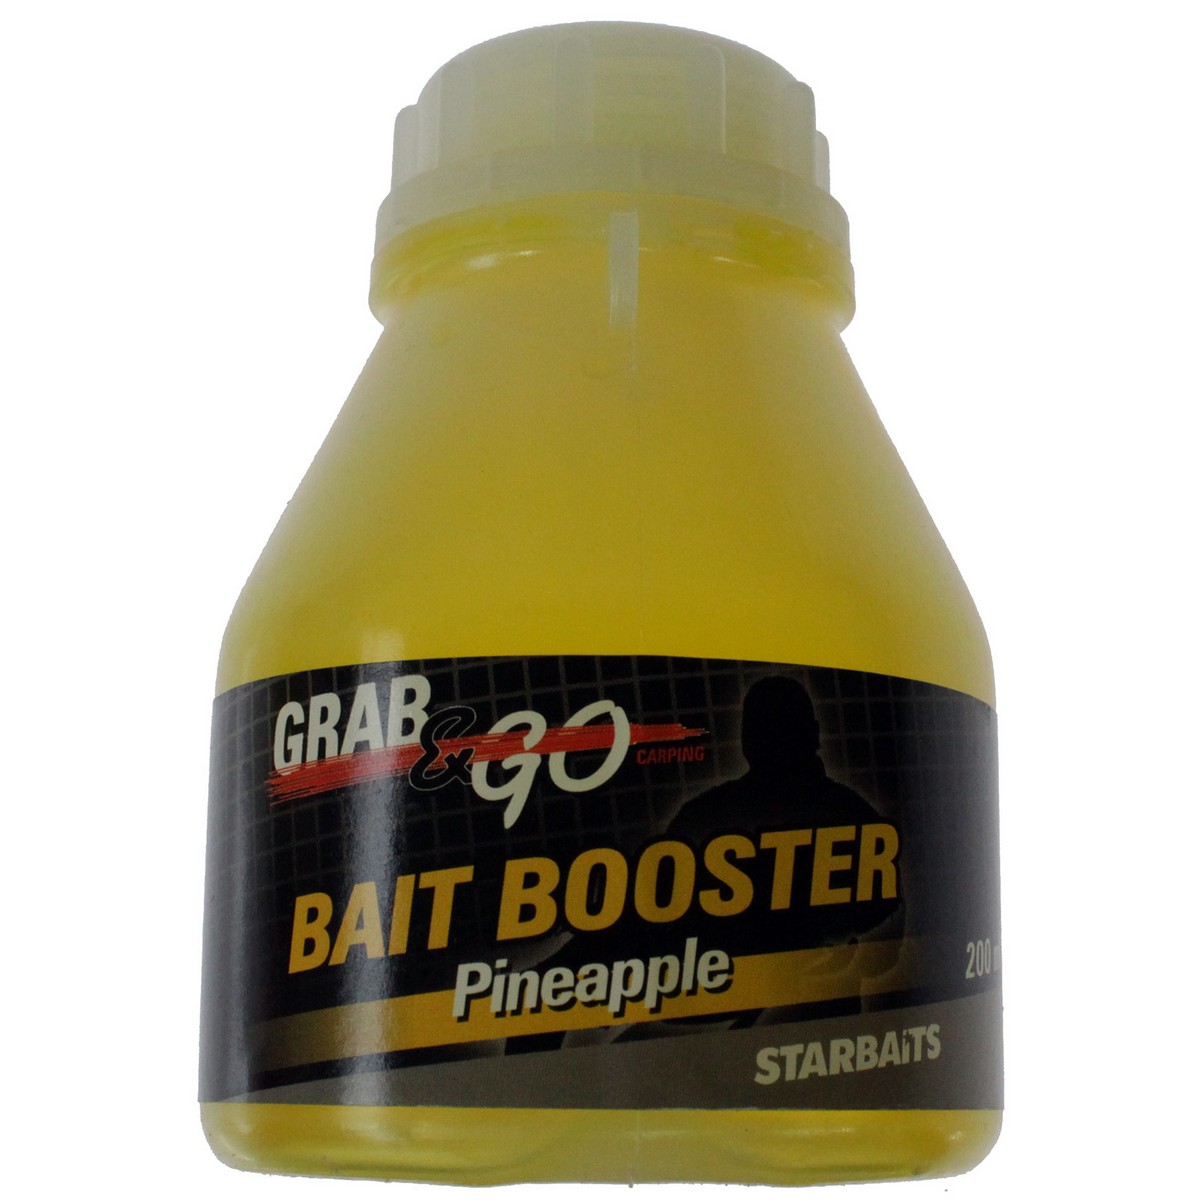 Dip StarBaits Grab and Go Bait Booster pineapple